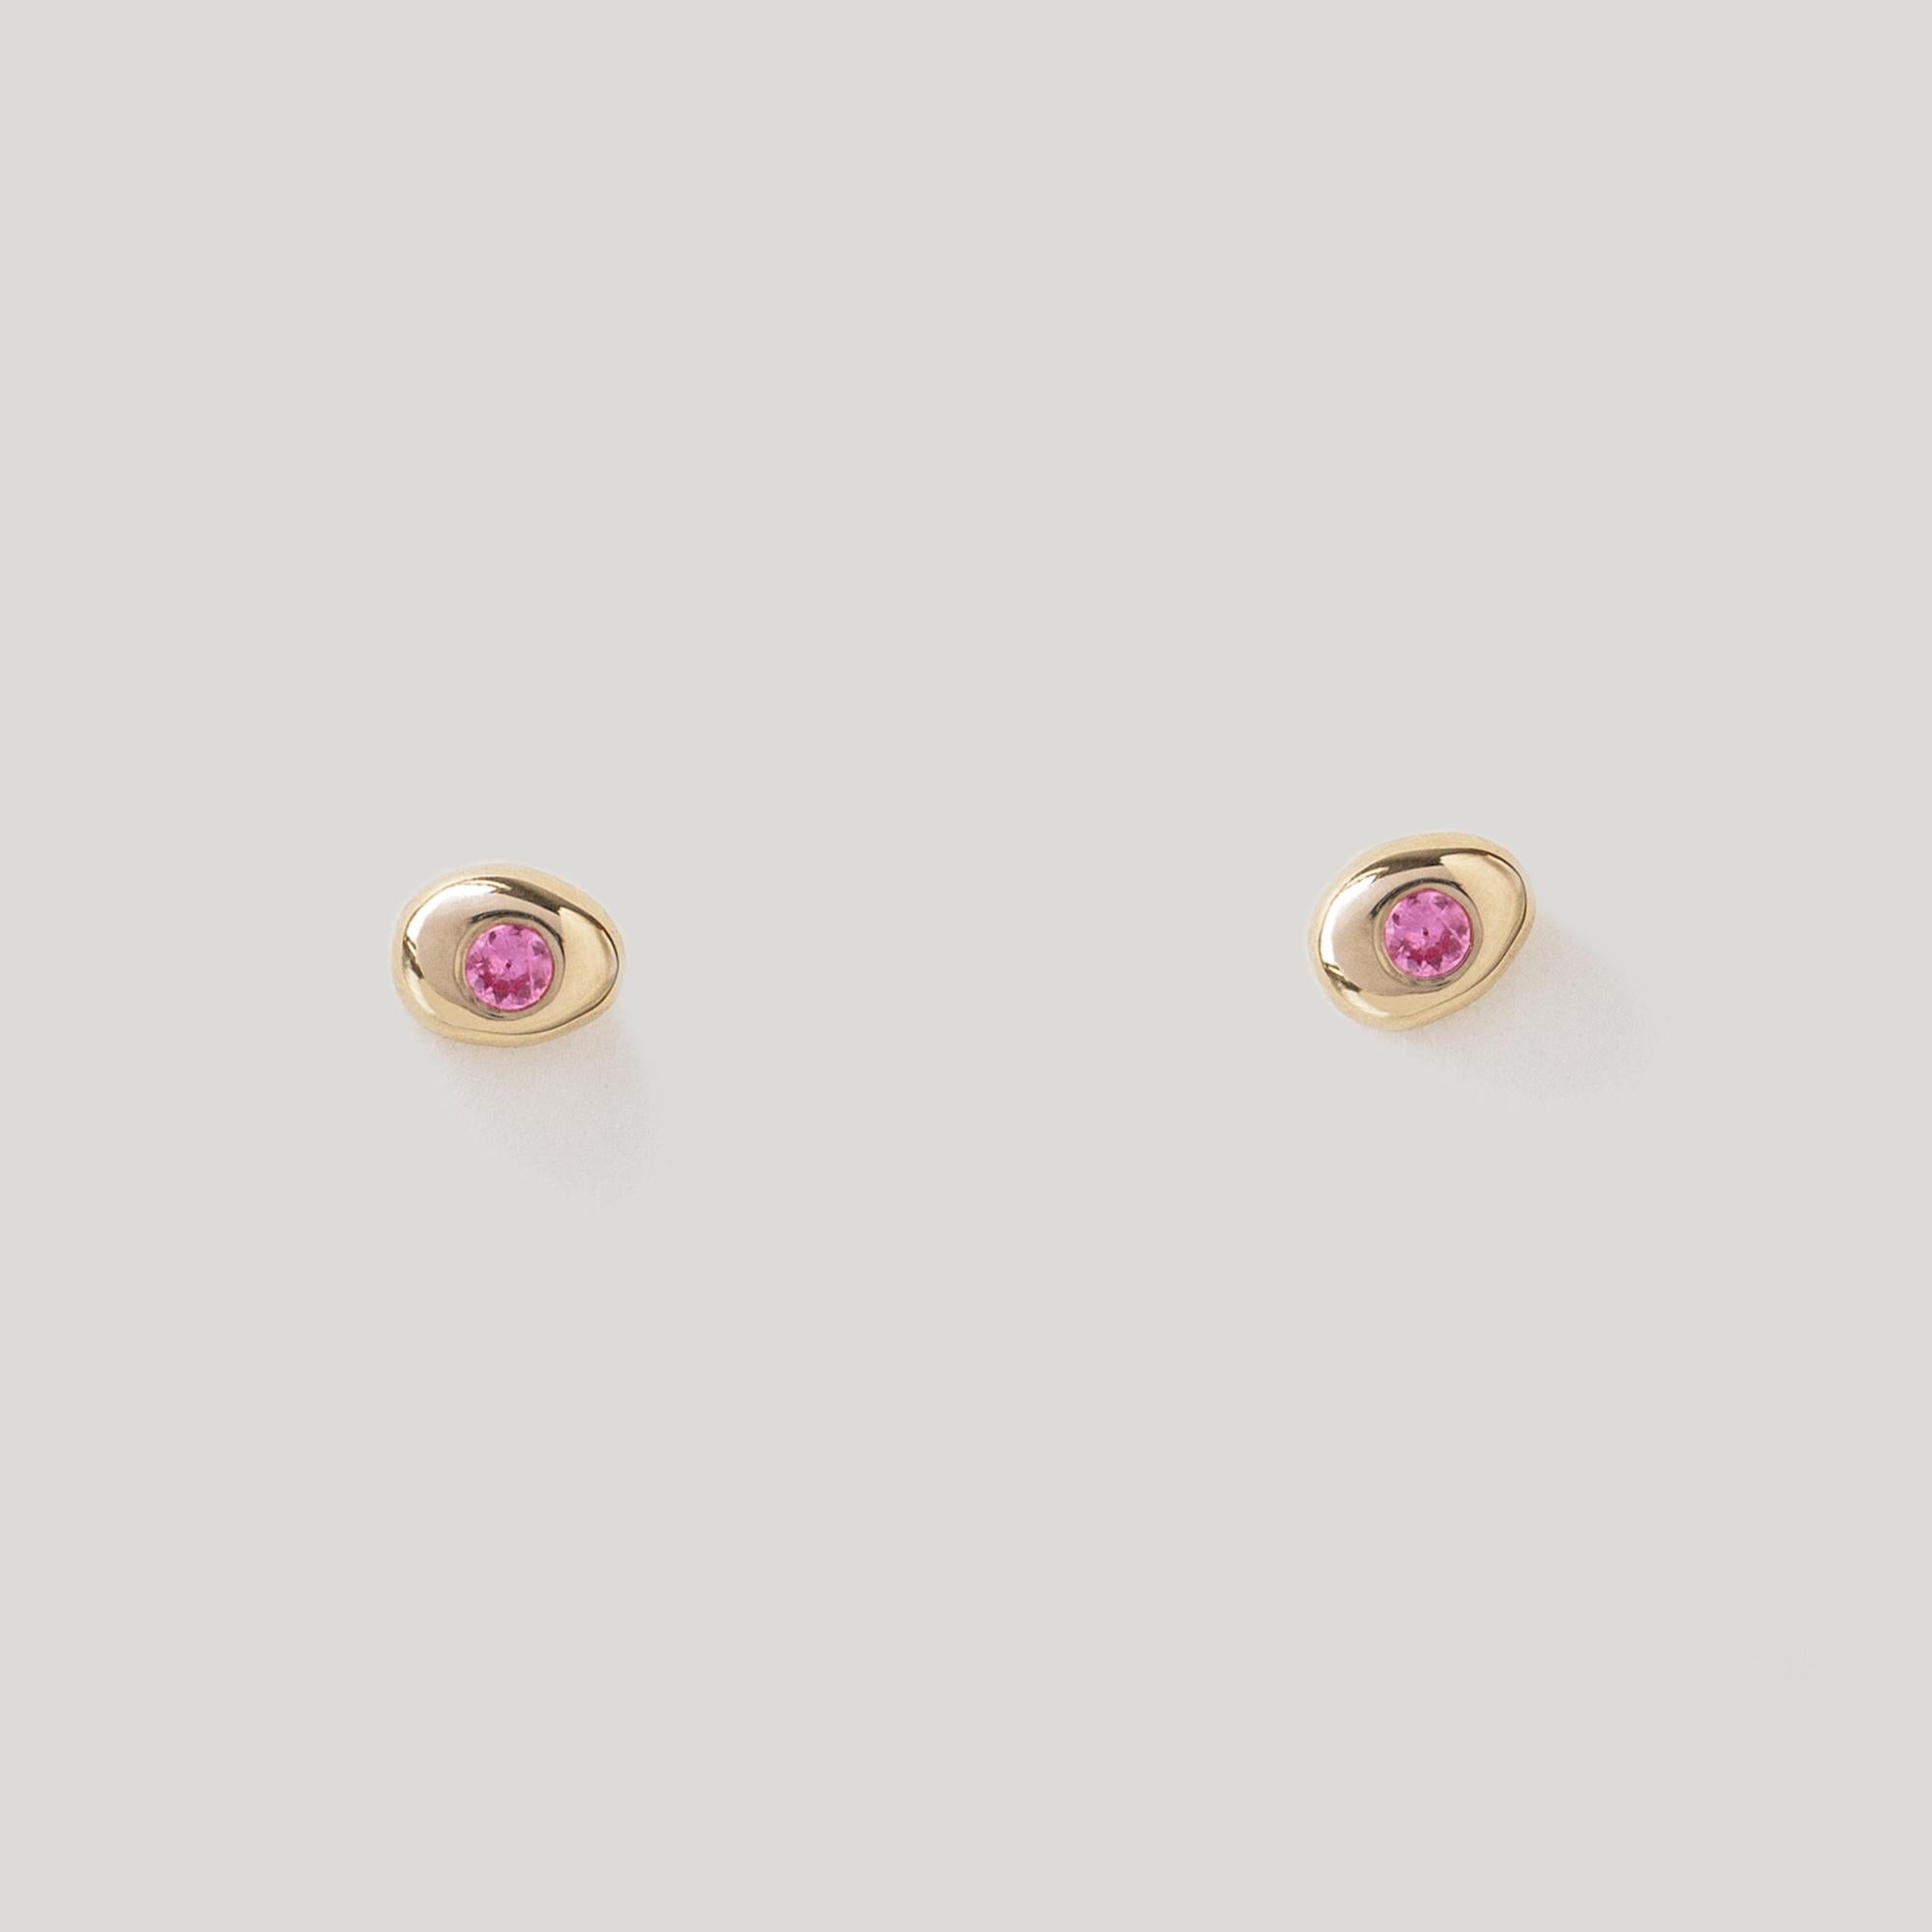 Tender little pebbles, pierced with a Pink Sapphire center.

14K YELLOW GOLD PAIR
READY TO SHIP

MATERIAL
◘  4mm wide by 5.5mm tall
◘  2mm brilliant-cut Pink Sapphire
◘  Sapphires are fair trade and sourced responsibly
◘  Post and back closure
◘ 